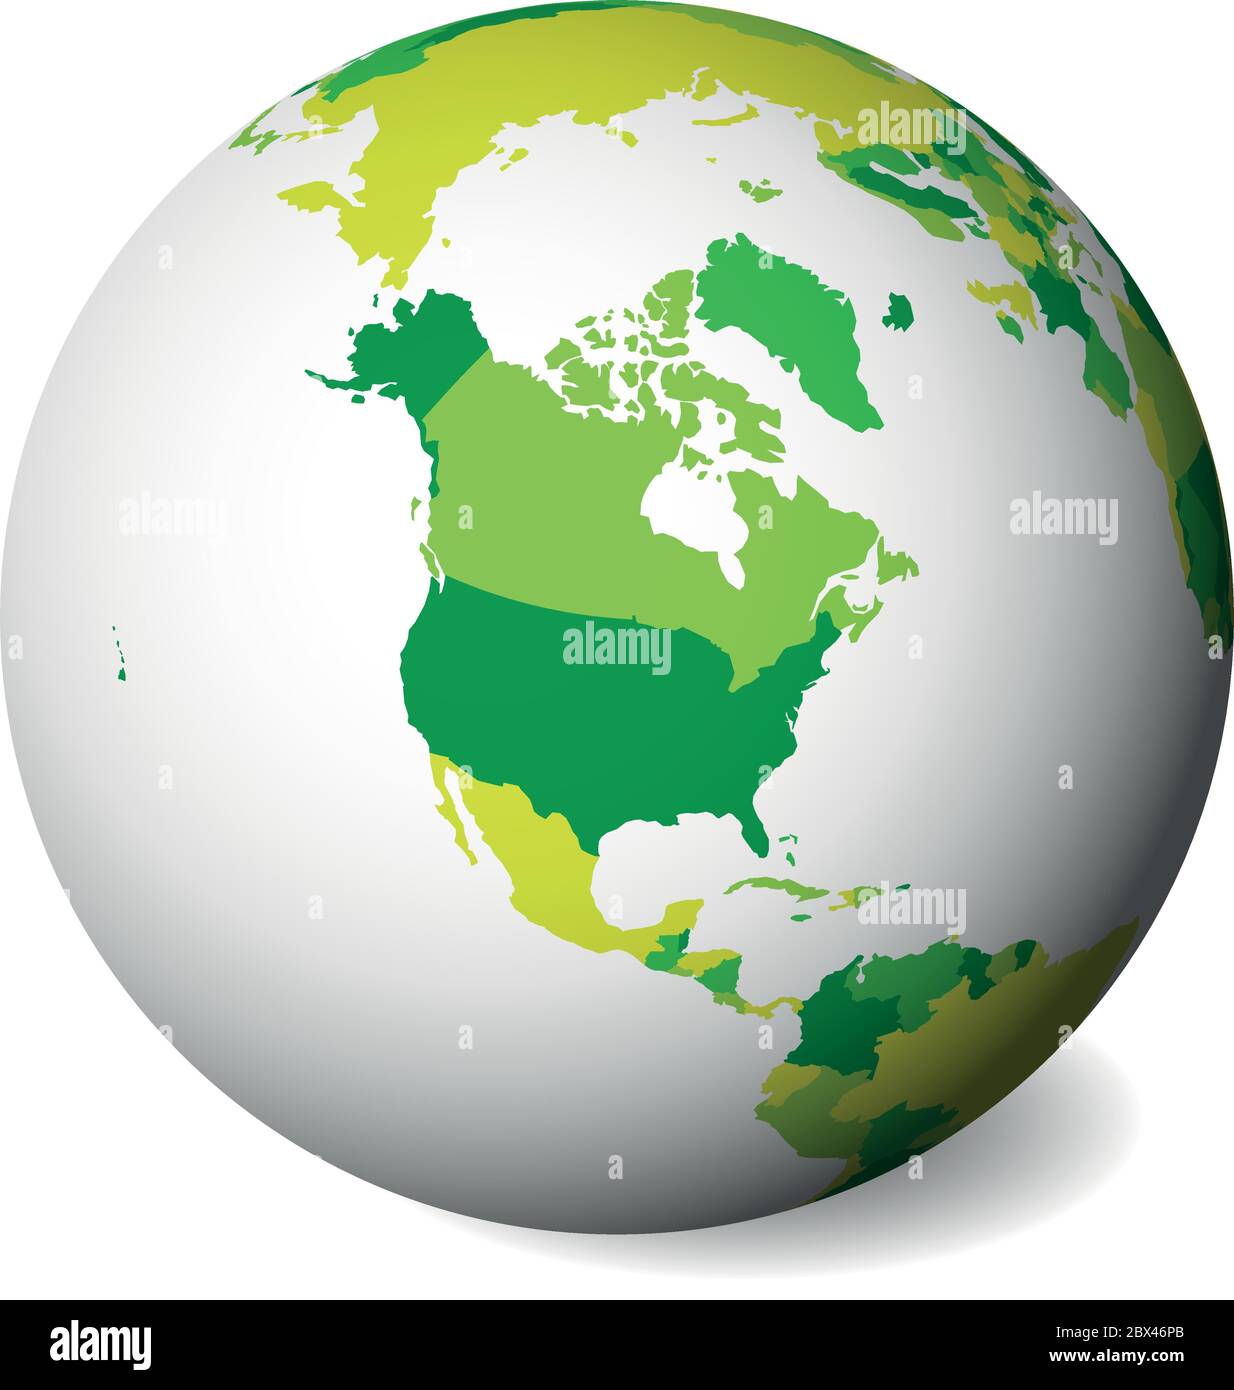 Blank political map of North America. 3D Earth globe with green map. Vector illustration. Stock Vector